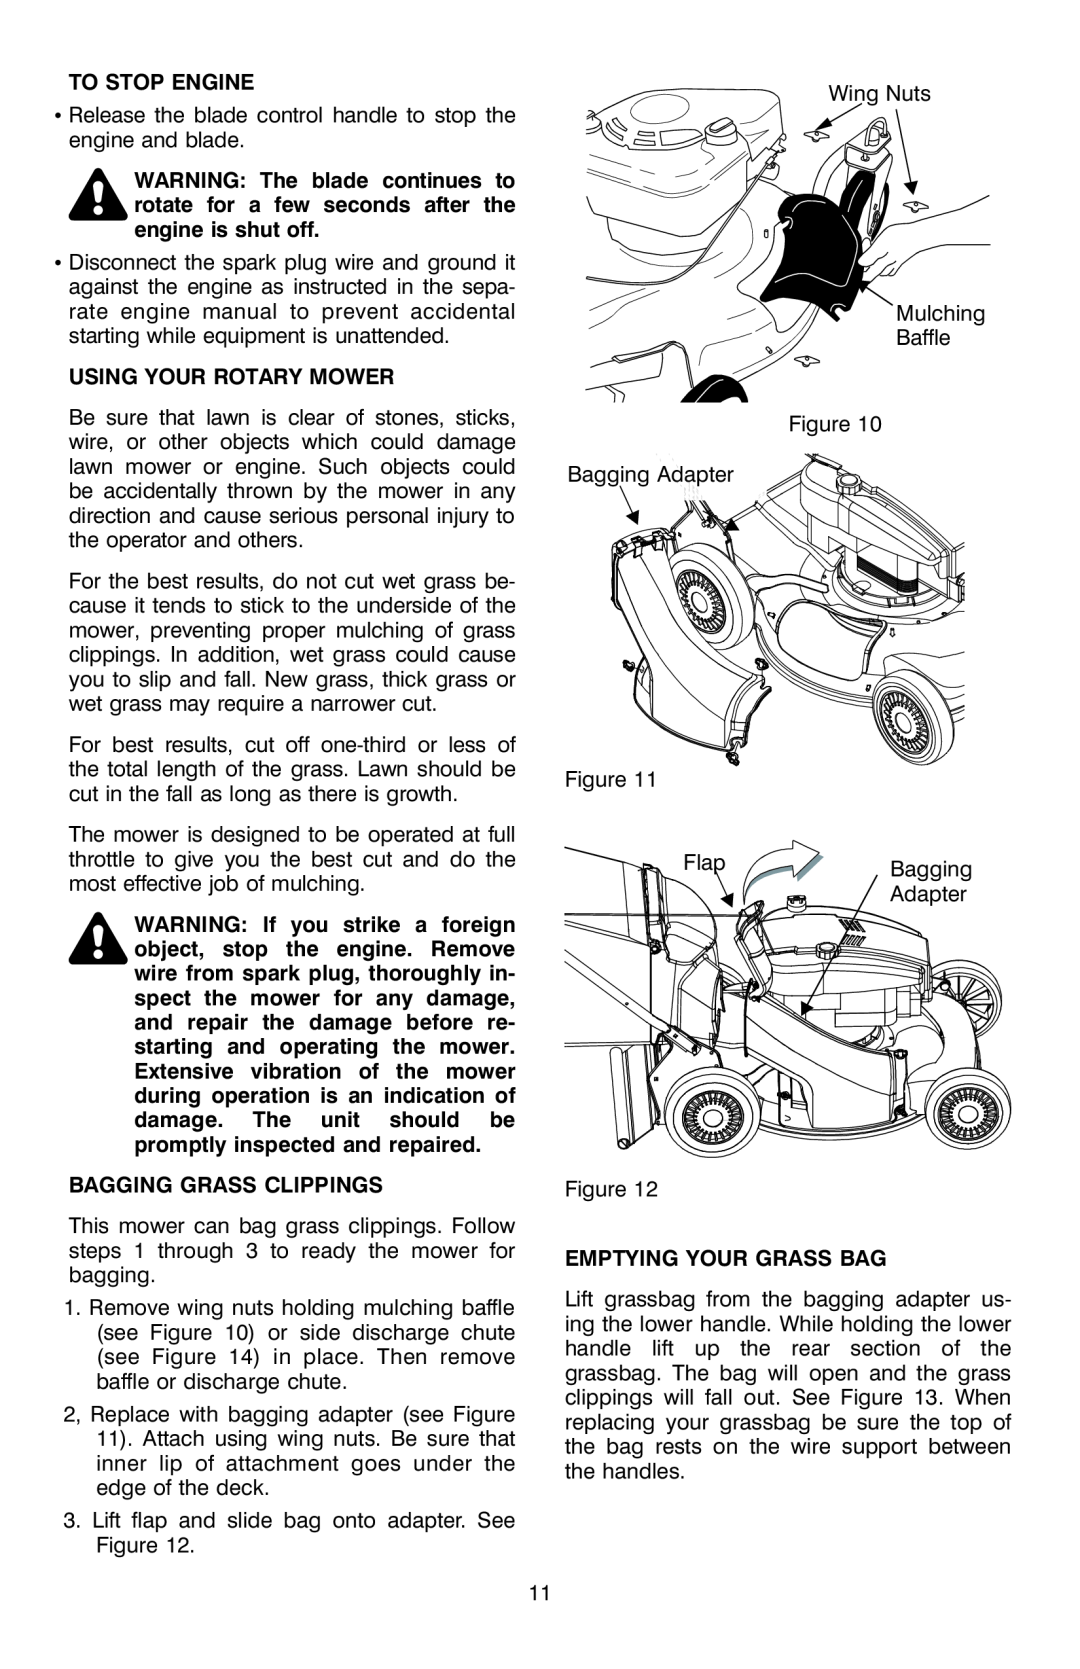 Troy-Bilt OG-4904 manual To Stop Engine, Using Your Rotary Mower, Bagging Grass Clippings, Emptying Your Grass Bag 